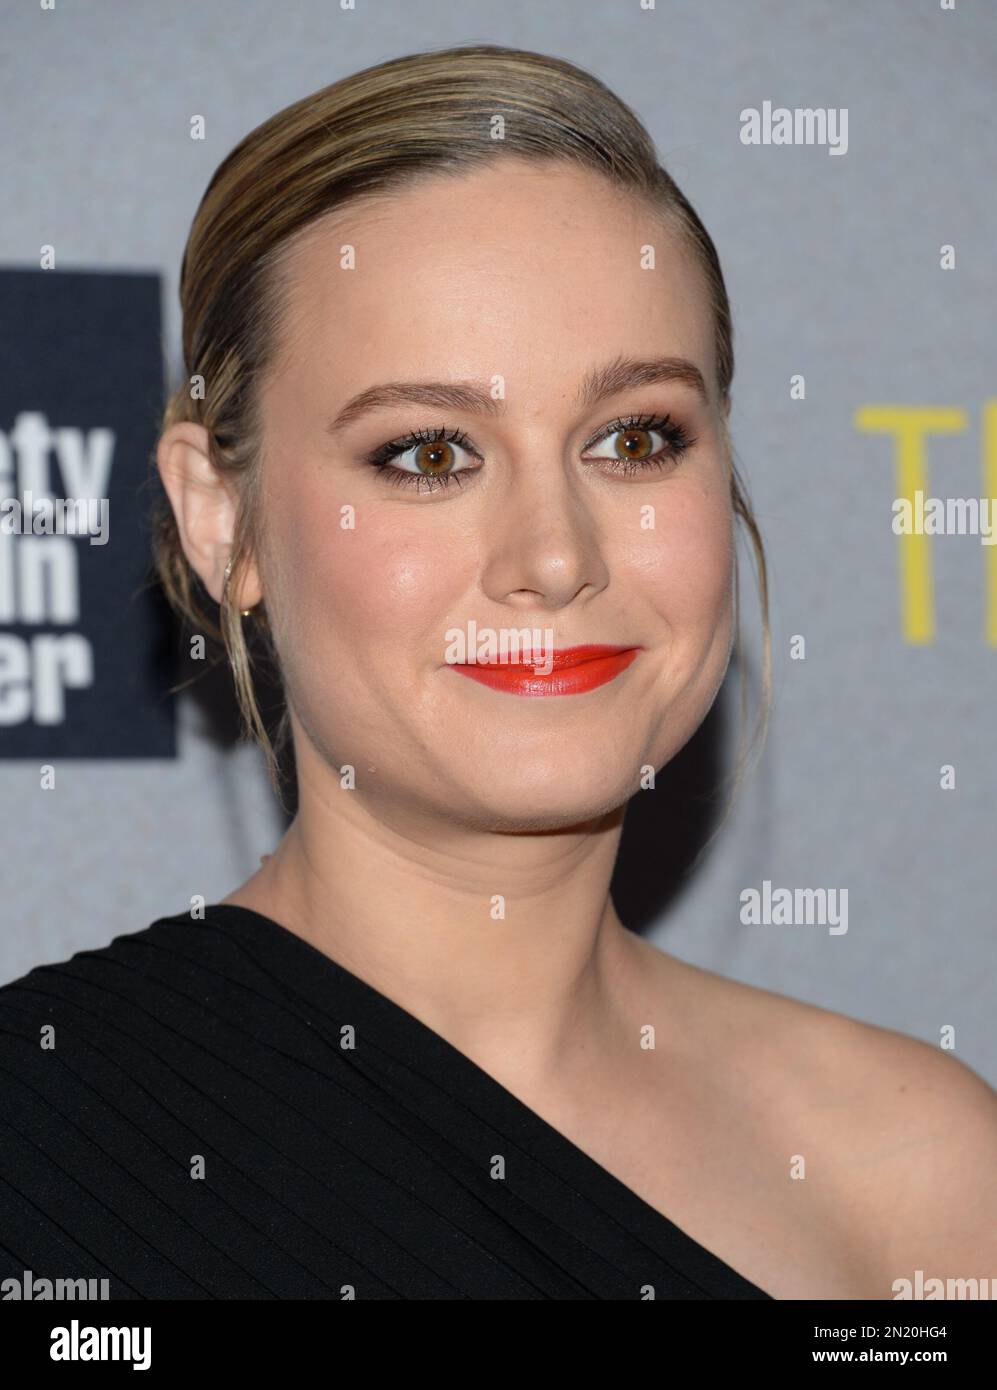 Brie Larson attends the world premiere of 